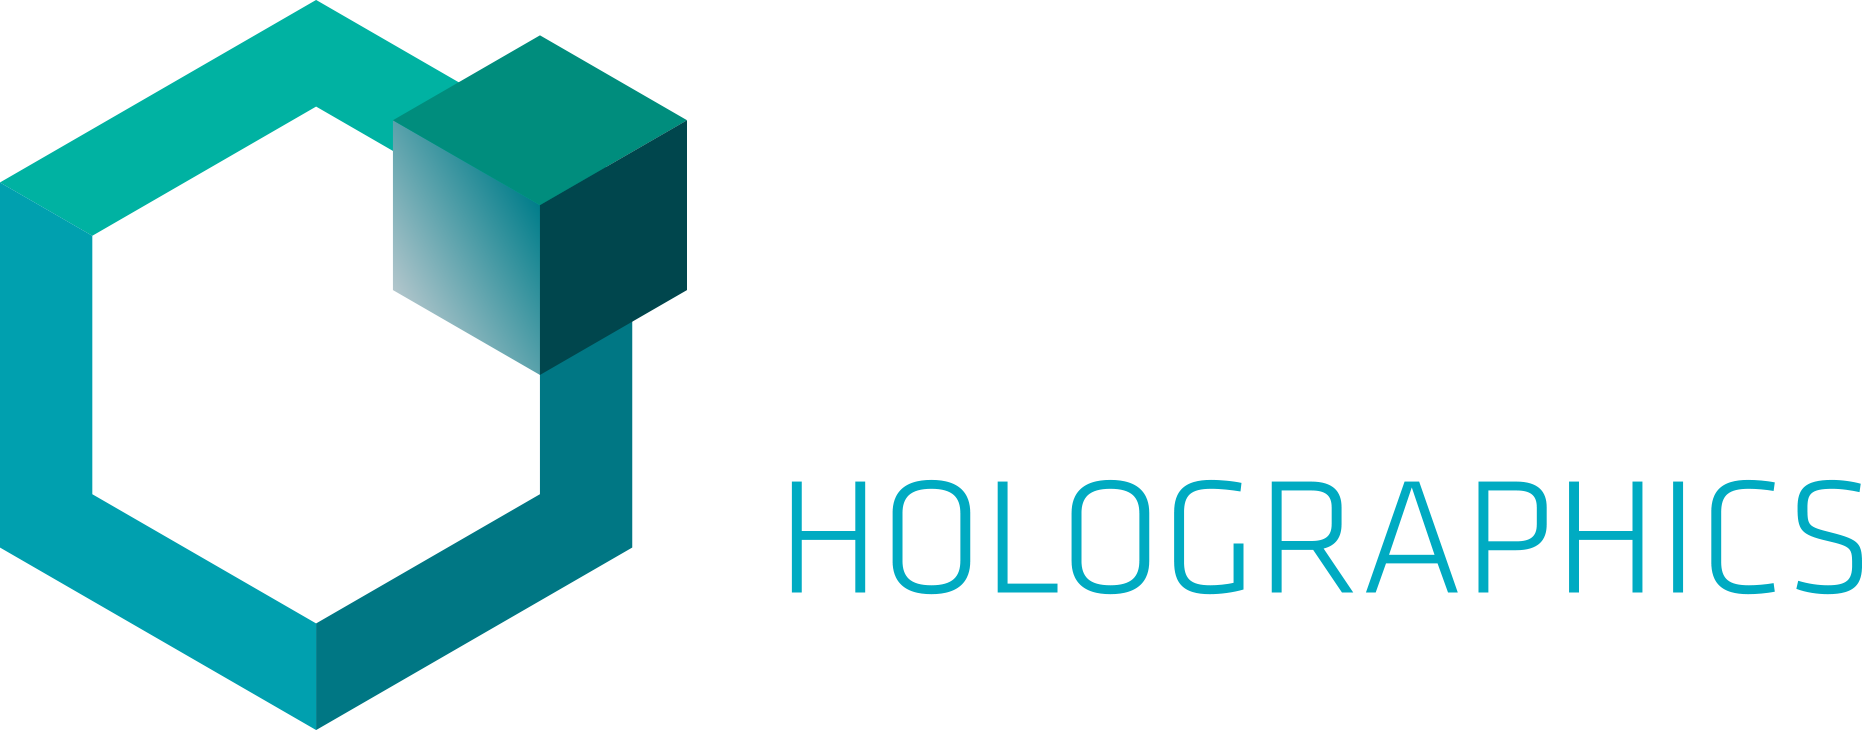 Hologram Projector Technology - Axiom Holographics